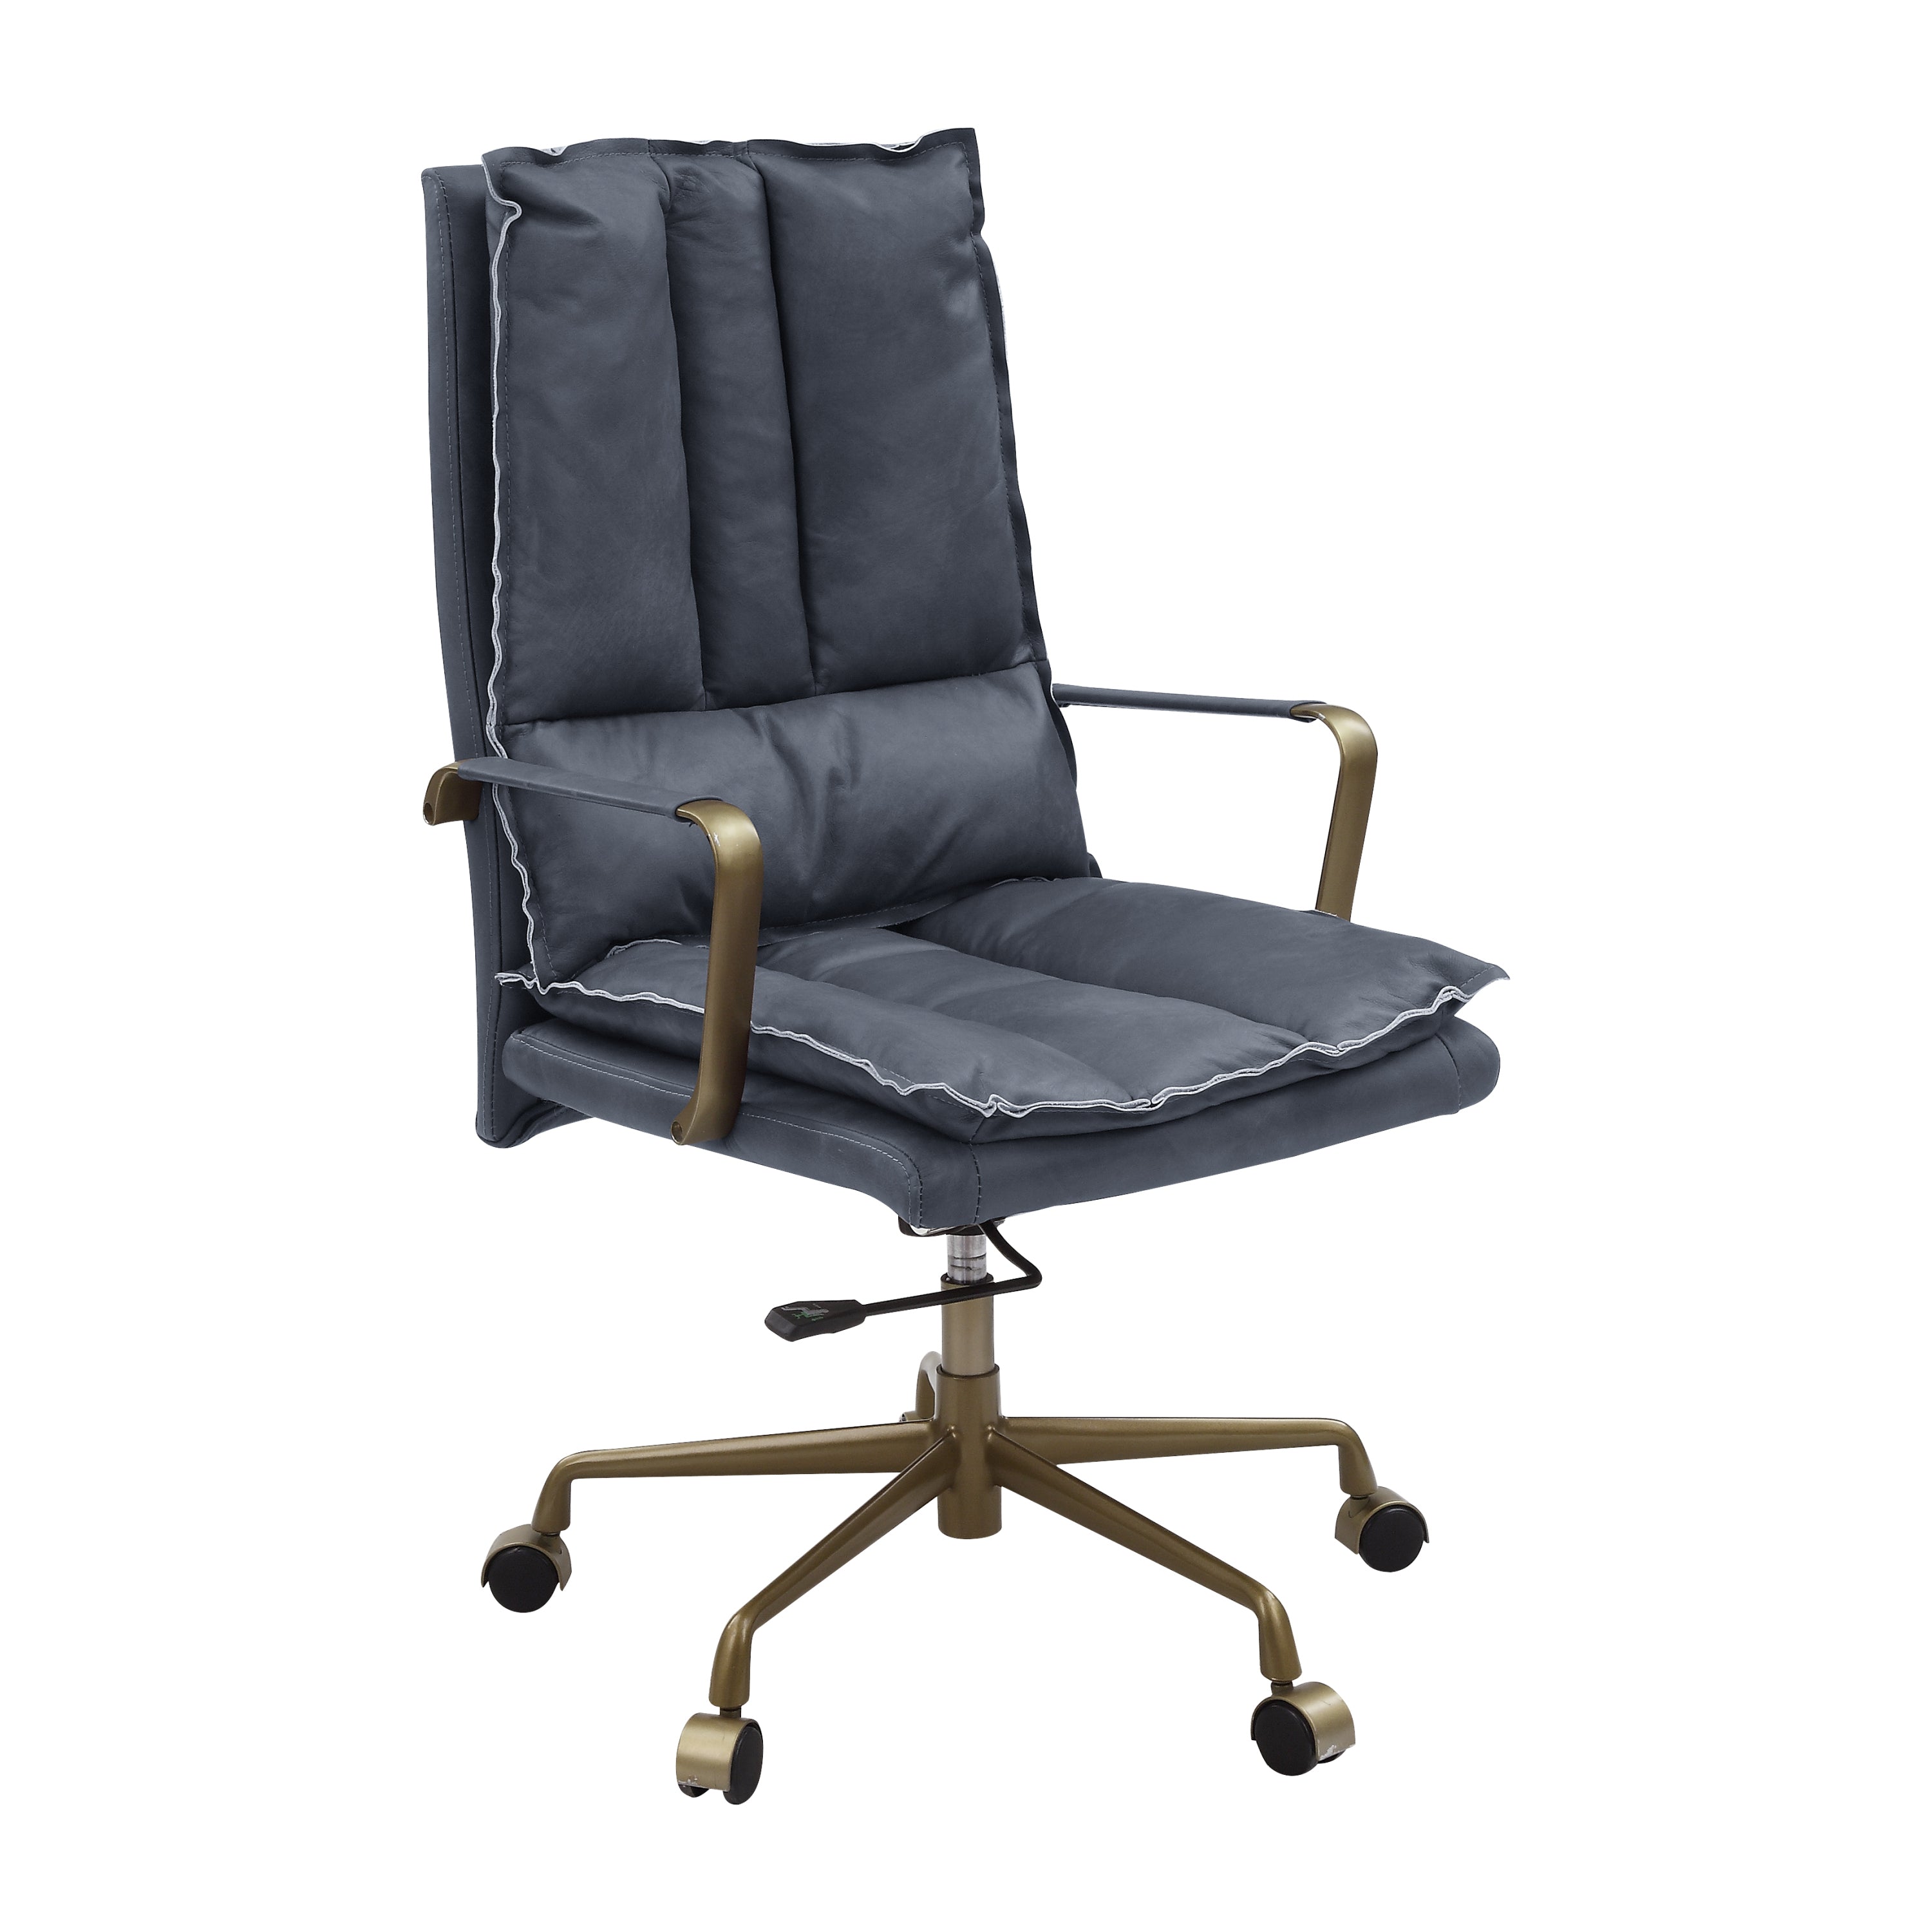 Executive Leather Office Chair - Grey